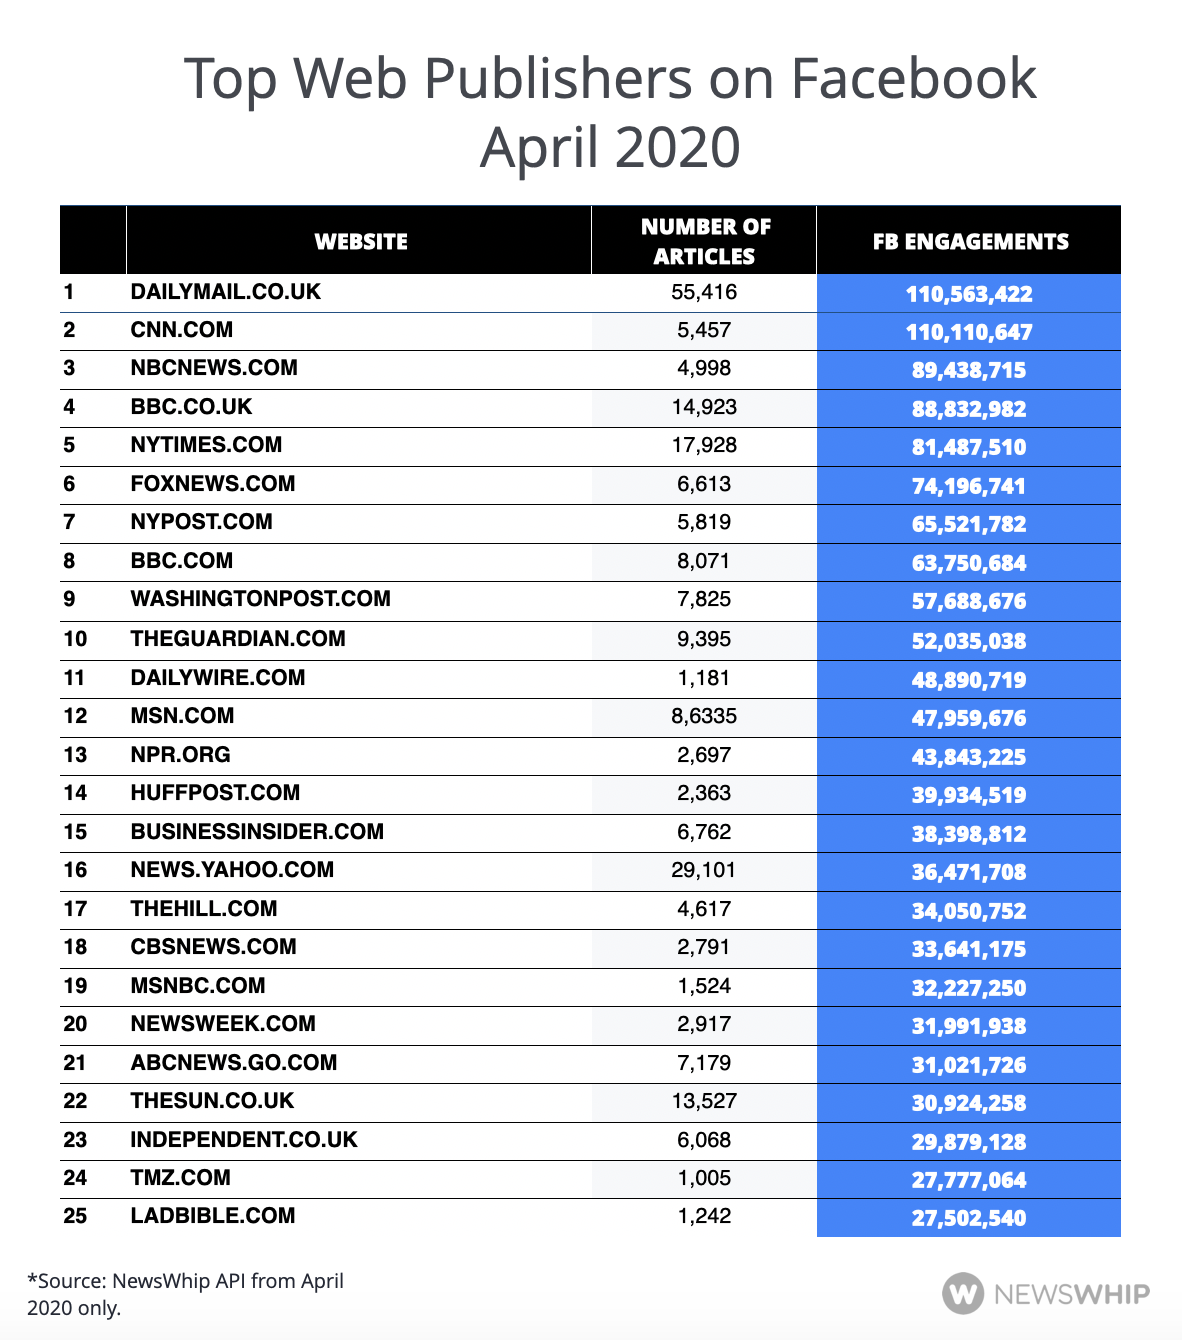 Chart showing the top 25 publishers on Facebook in April 2020